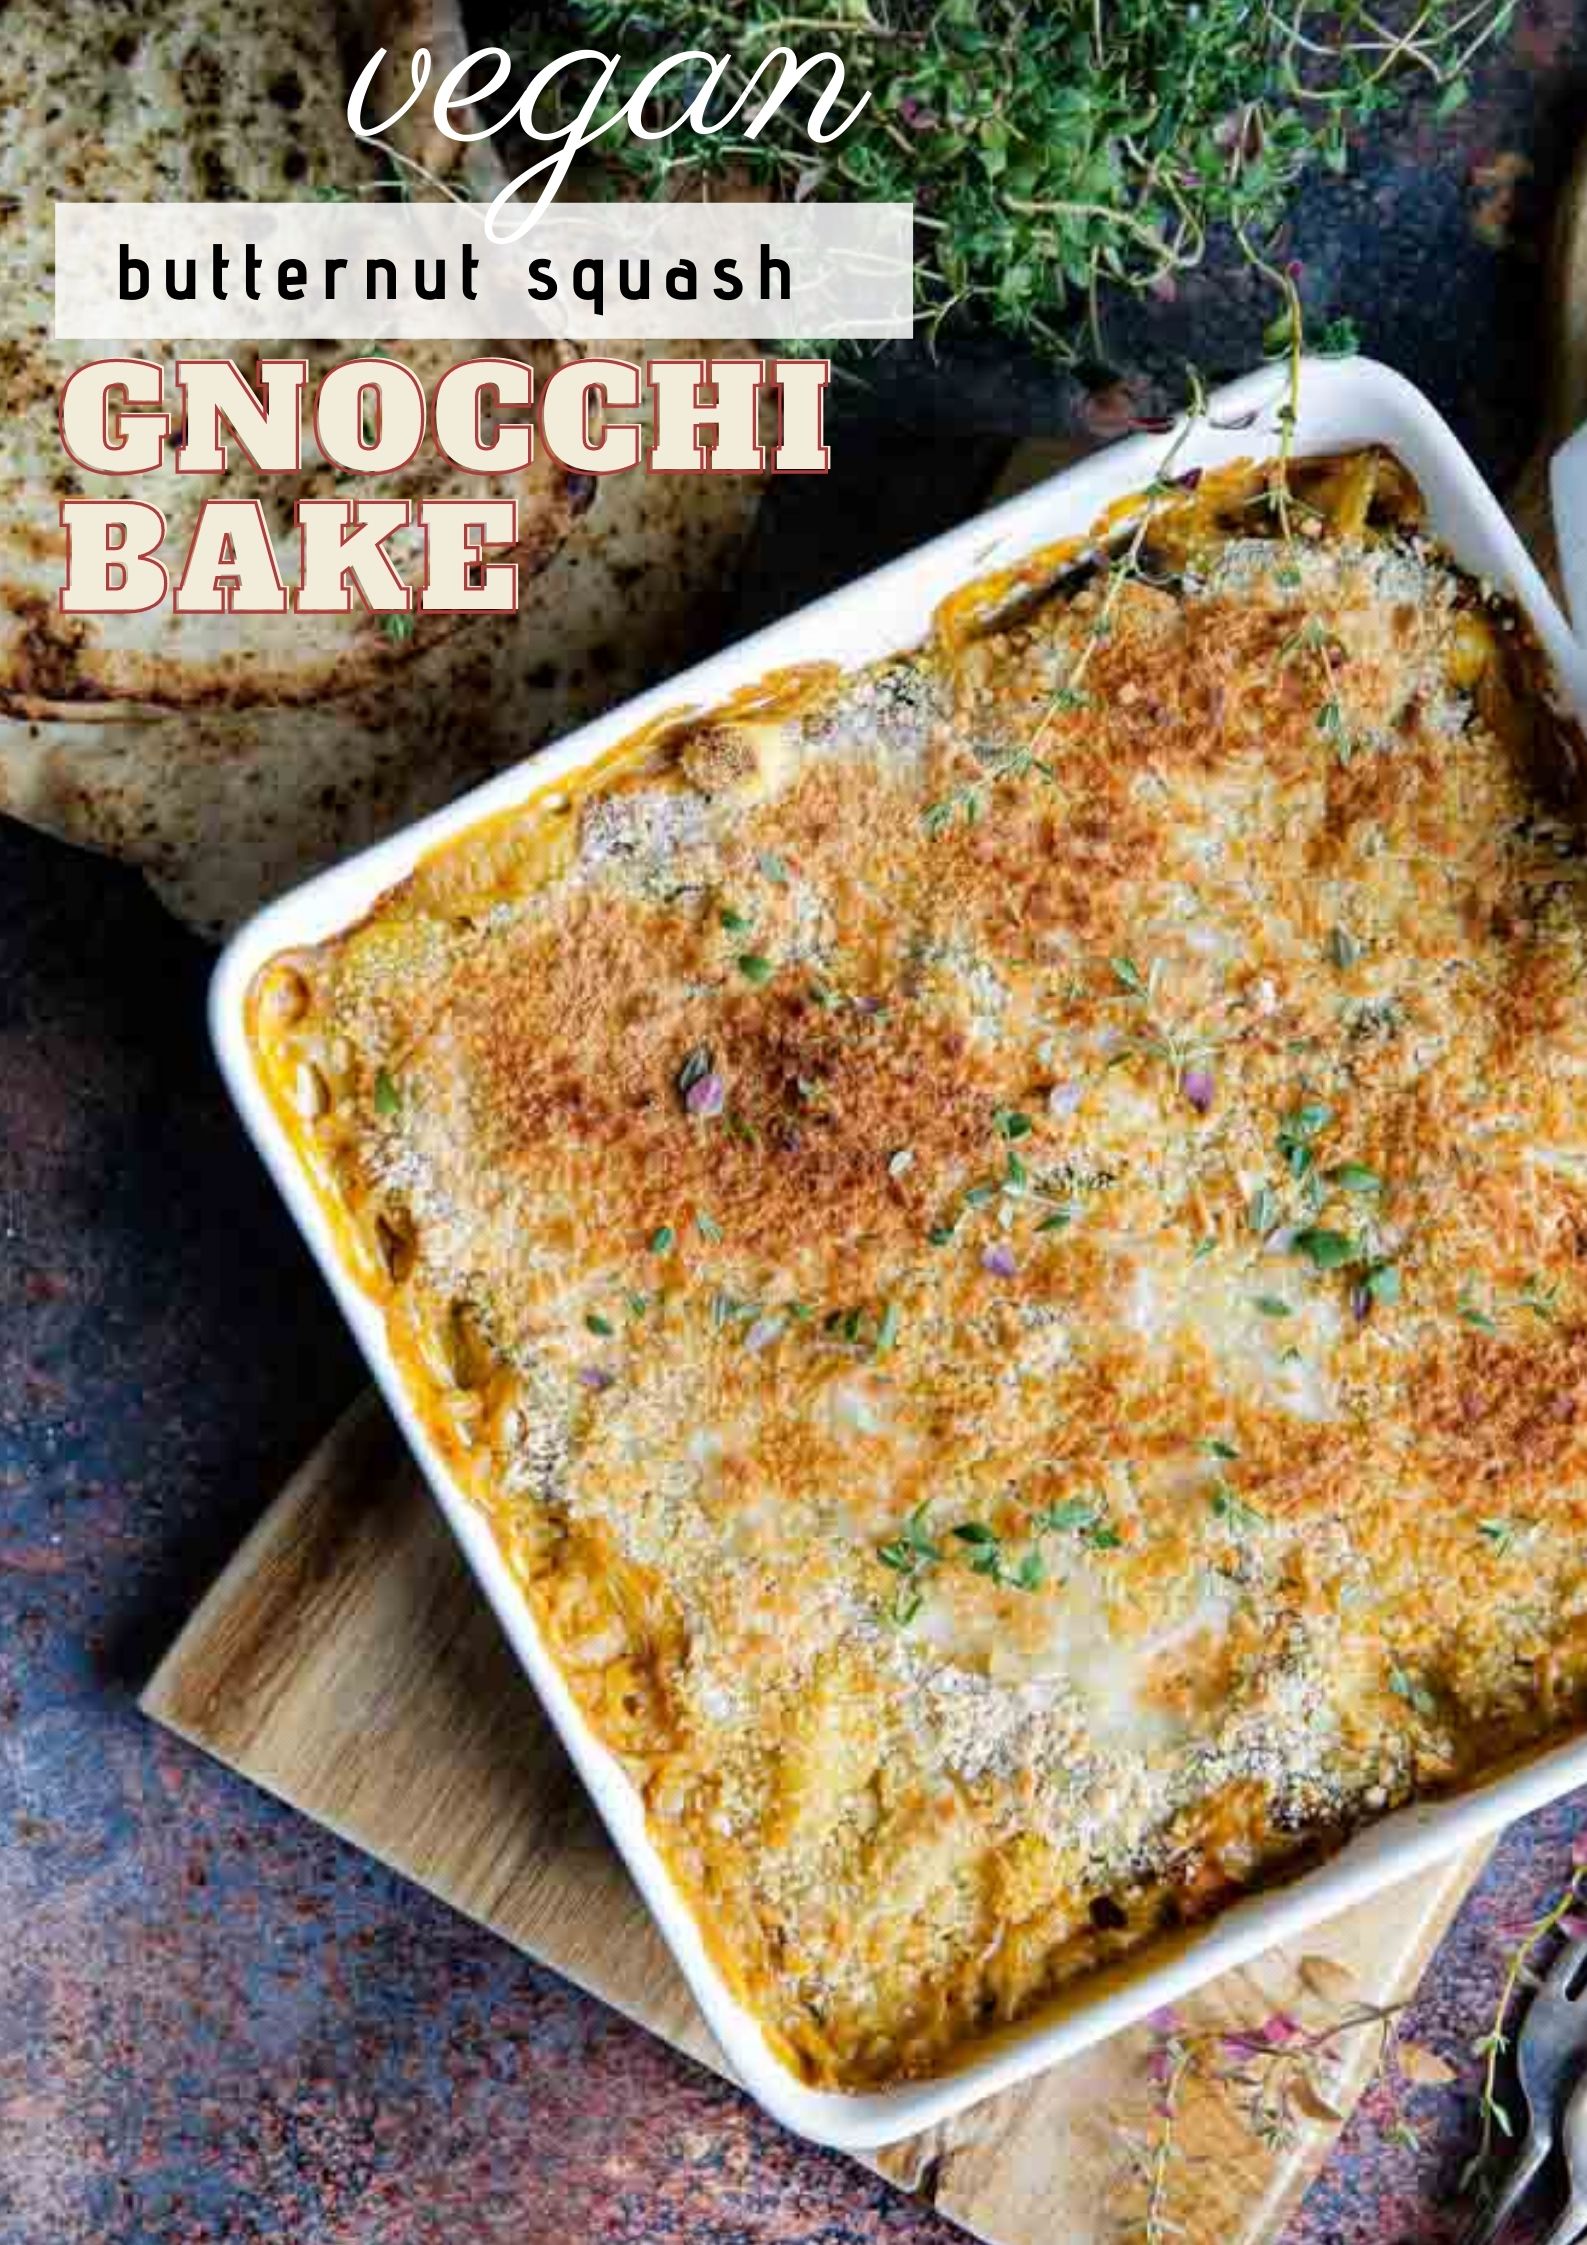 This vegan gnocchi bake is cosy, comfort food heaven that's easy, cooked in one pan and totally delivers on warming, delicious flavours! Recipe on thecookandhim.com | #vegan #veganmeal #veganrecipe #autumnrecipe #fallrecipe #gnocchi #gnocchibake